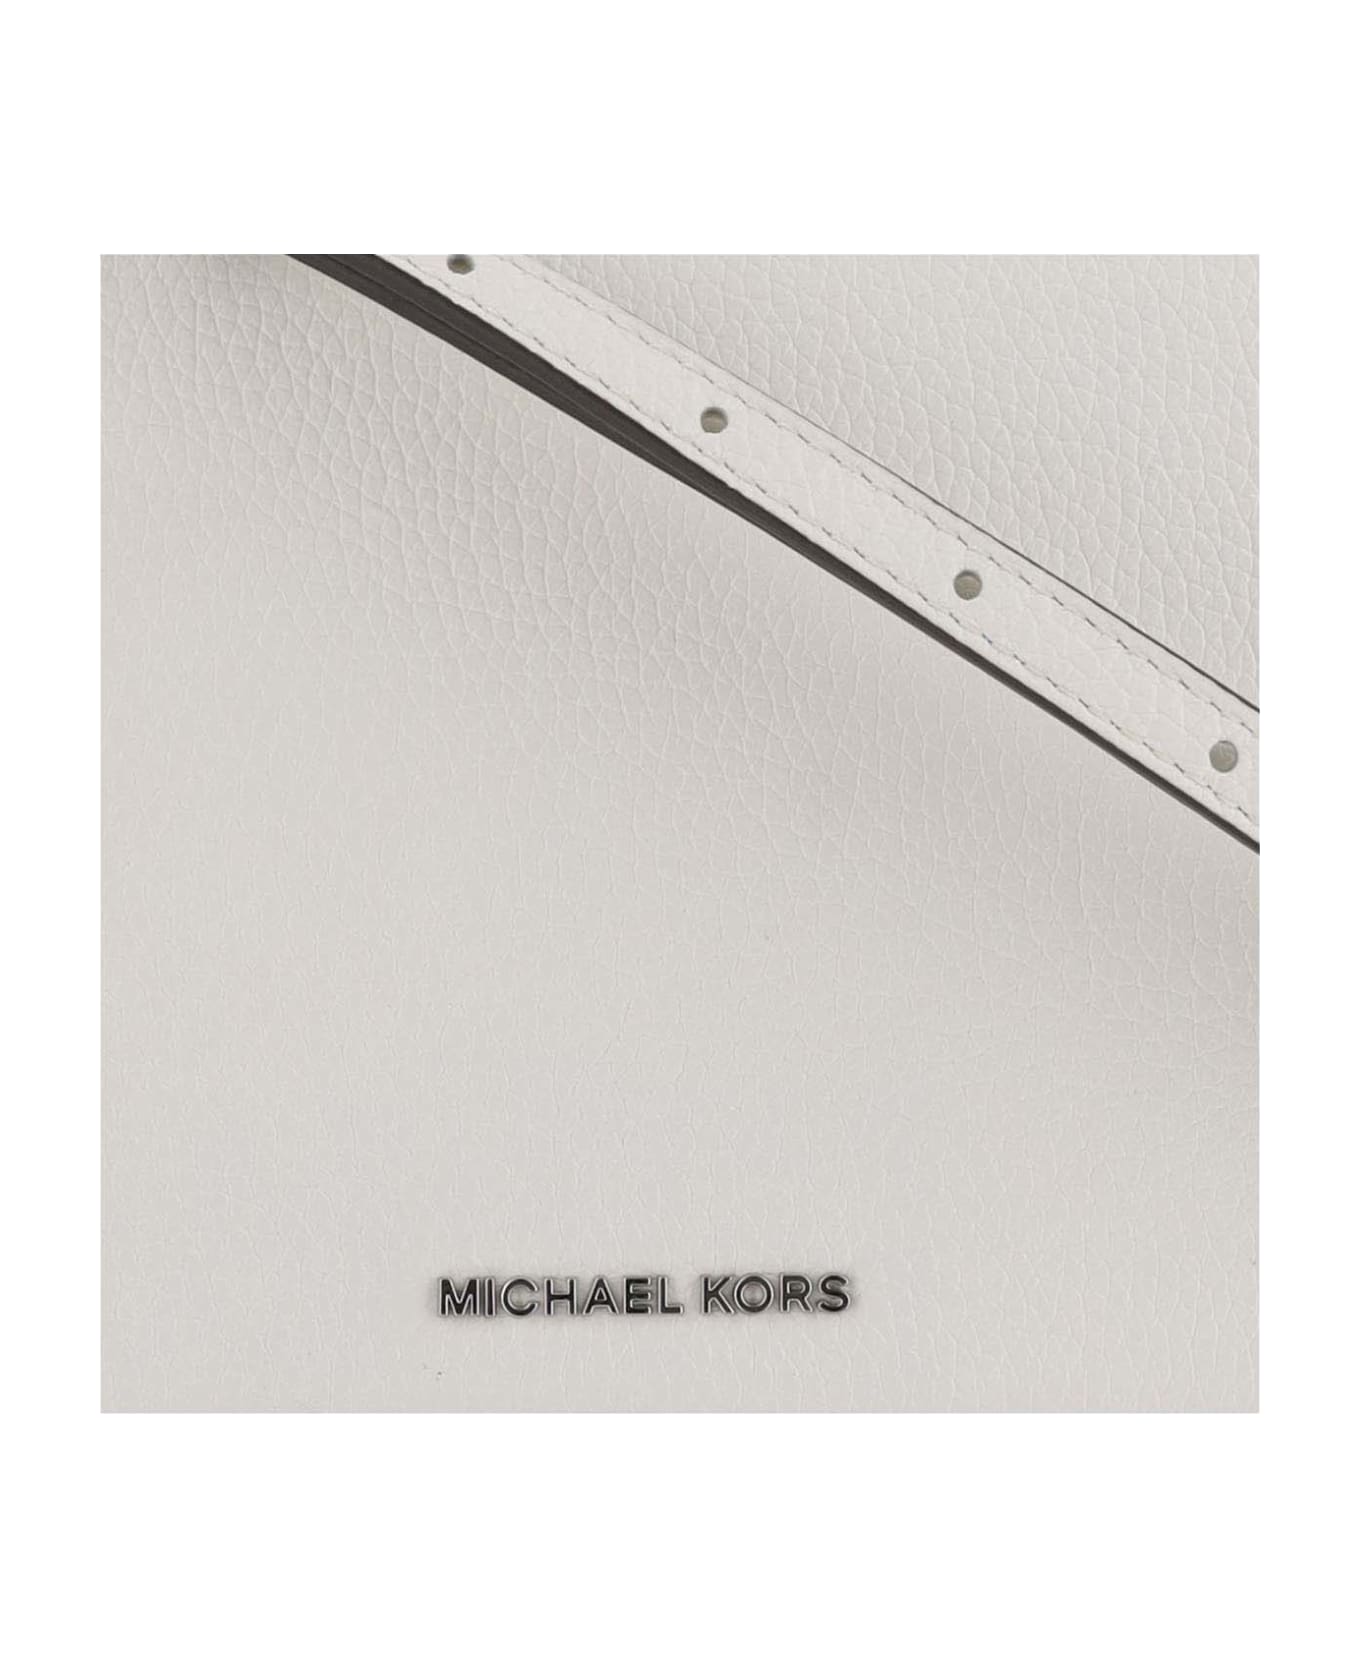 Michael Kors Leather Shoulder Bag With Logo - White ショルダーバッグ